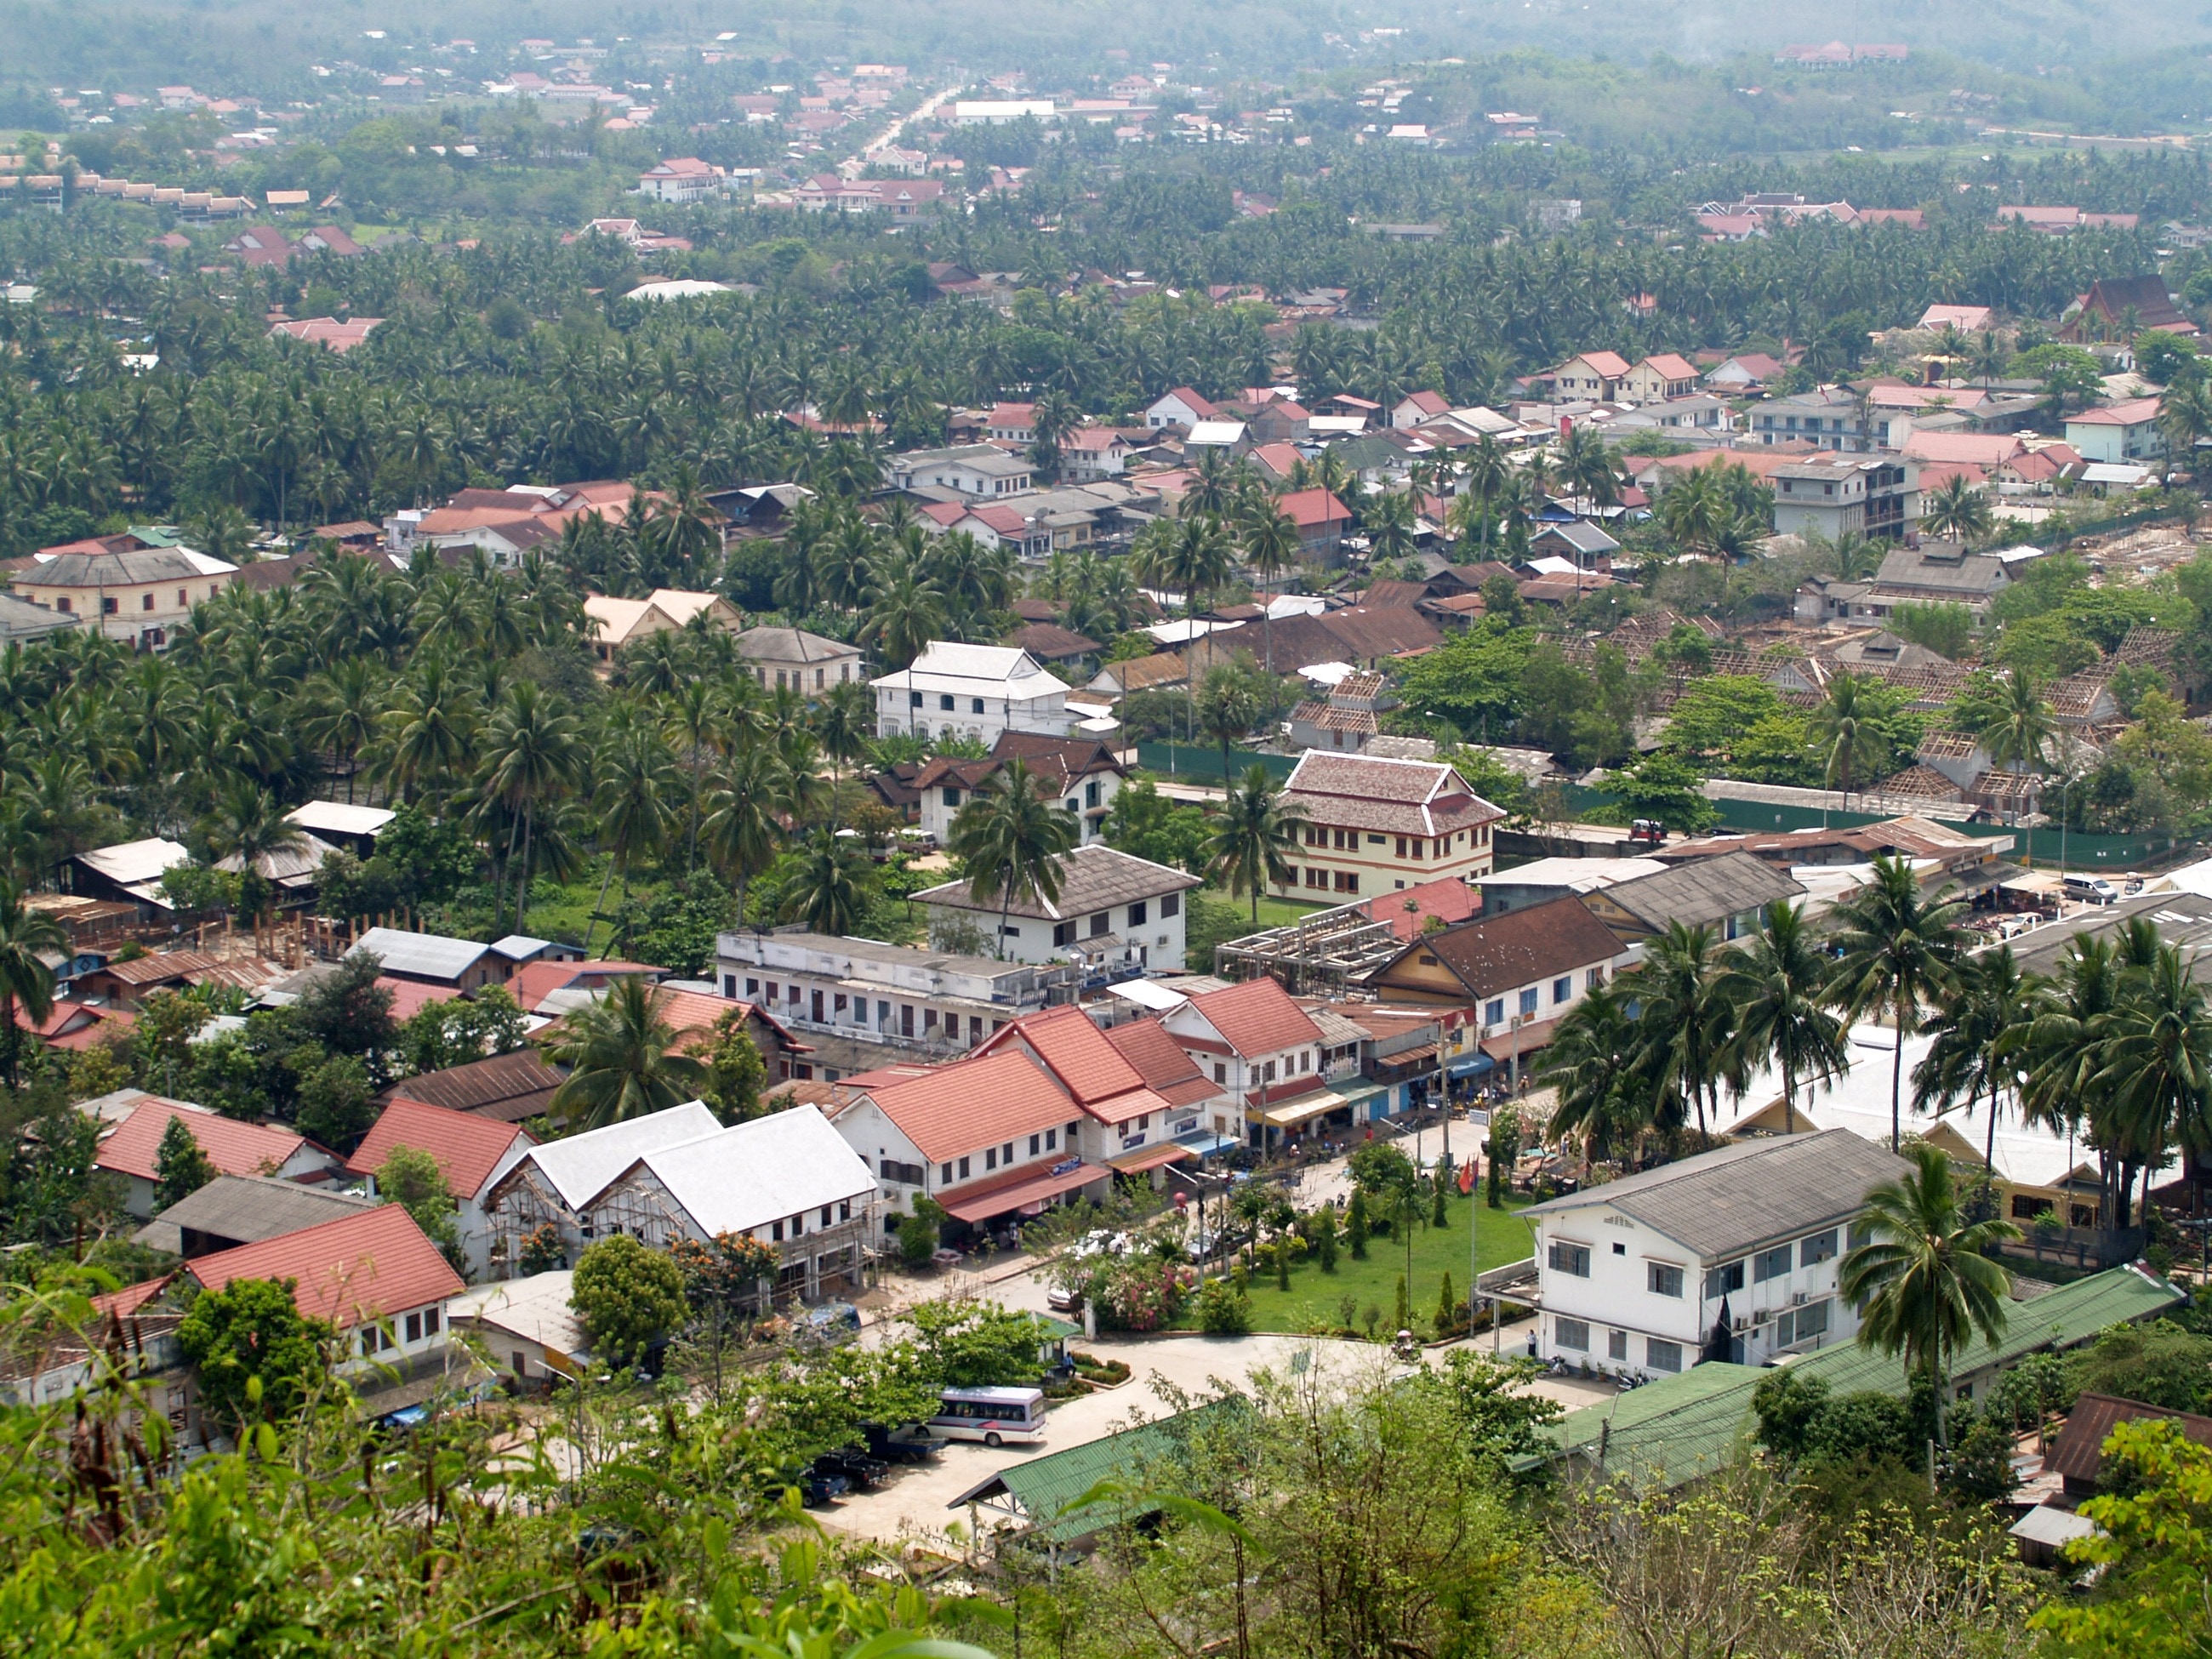 aerial photo of town surrounded with tall trees